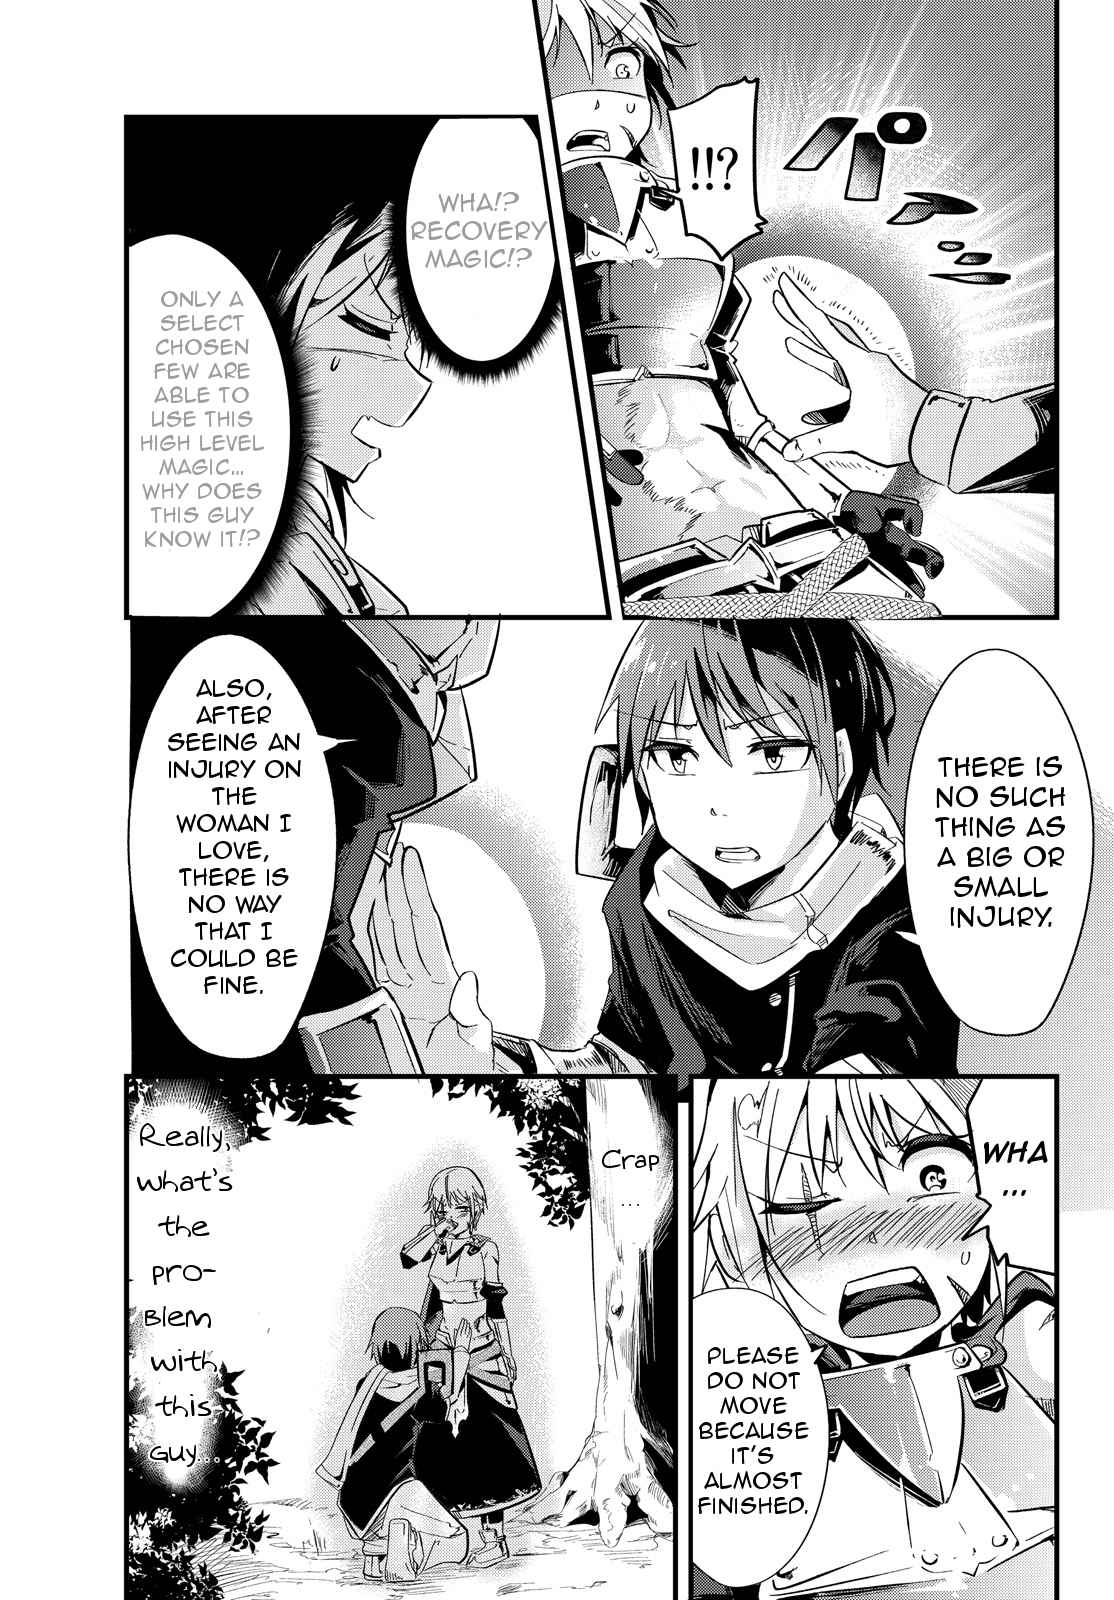 A Story About Treating a Female Knight Who Has Never Been Treated as a Woman Ch.2